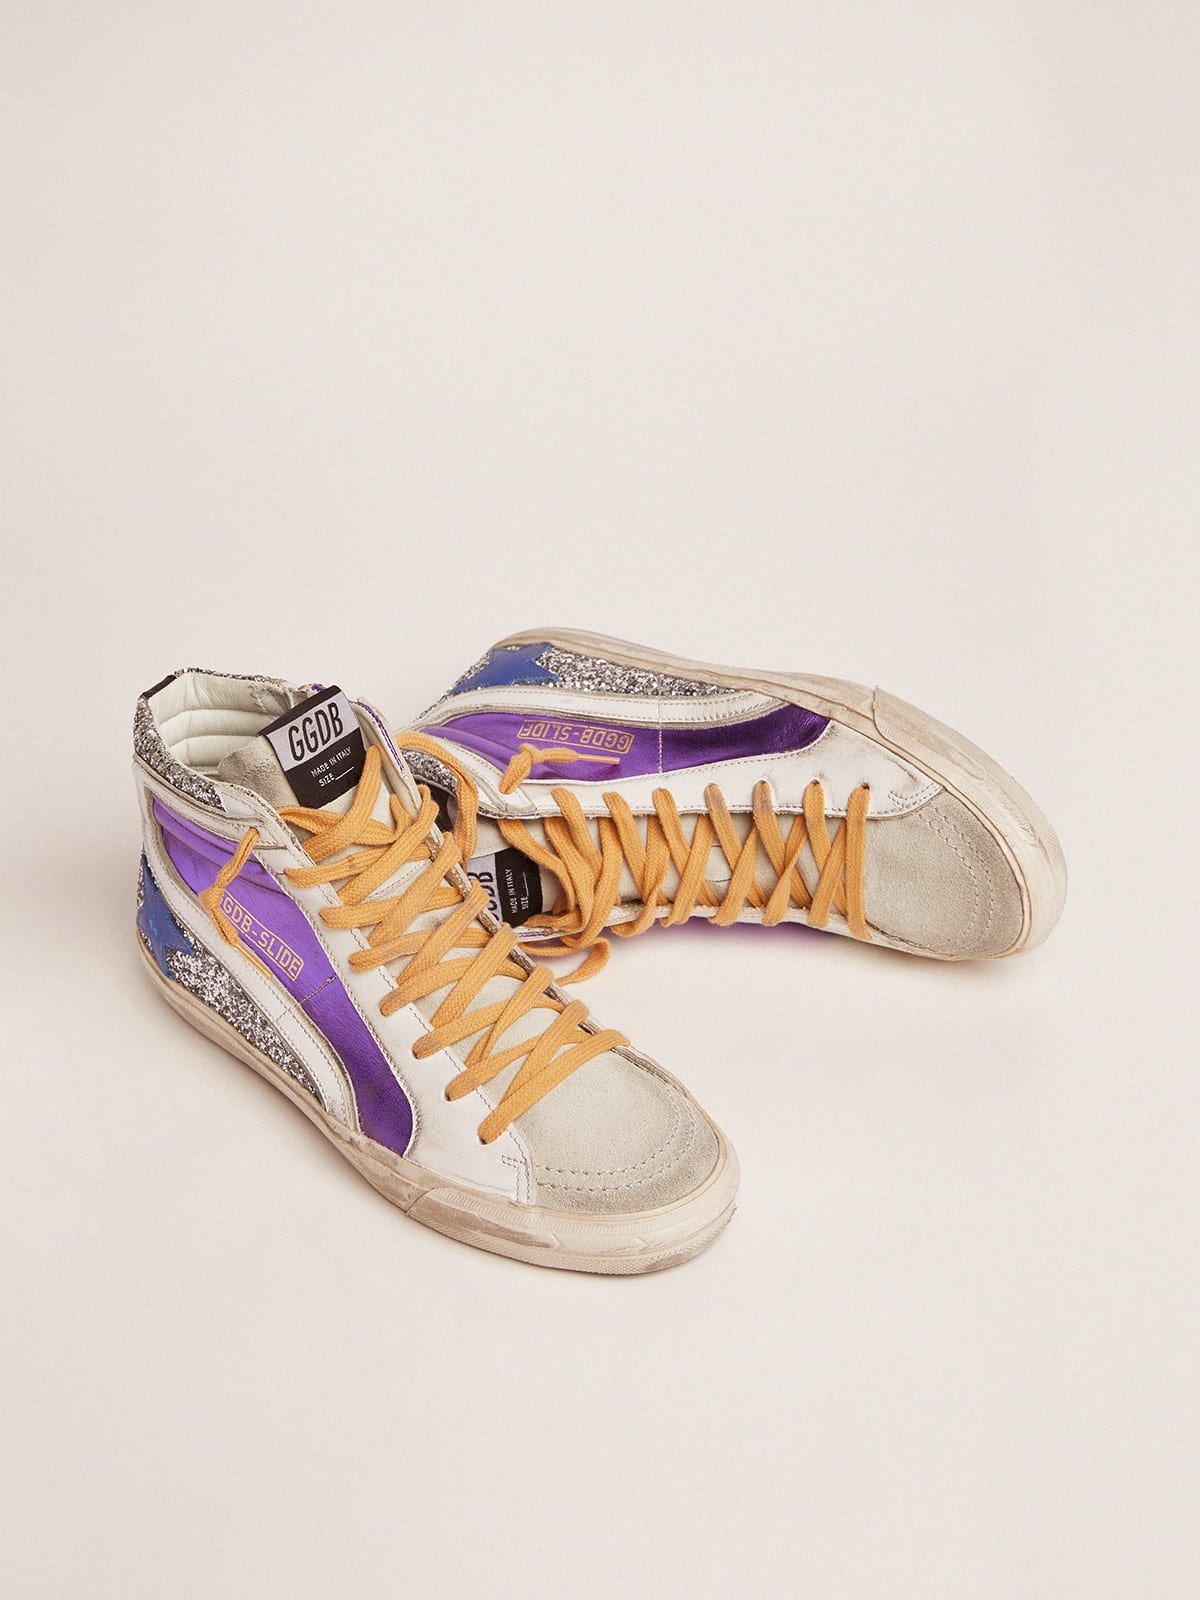 Slide sneakers with silver glitter and purple laminated leather upper |  Golden Goose